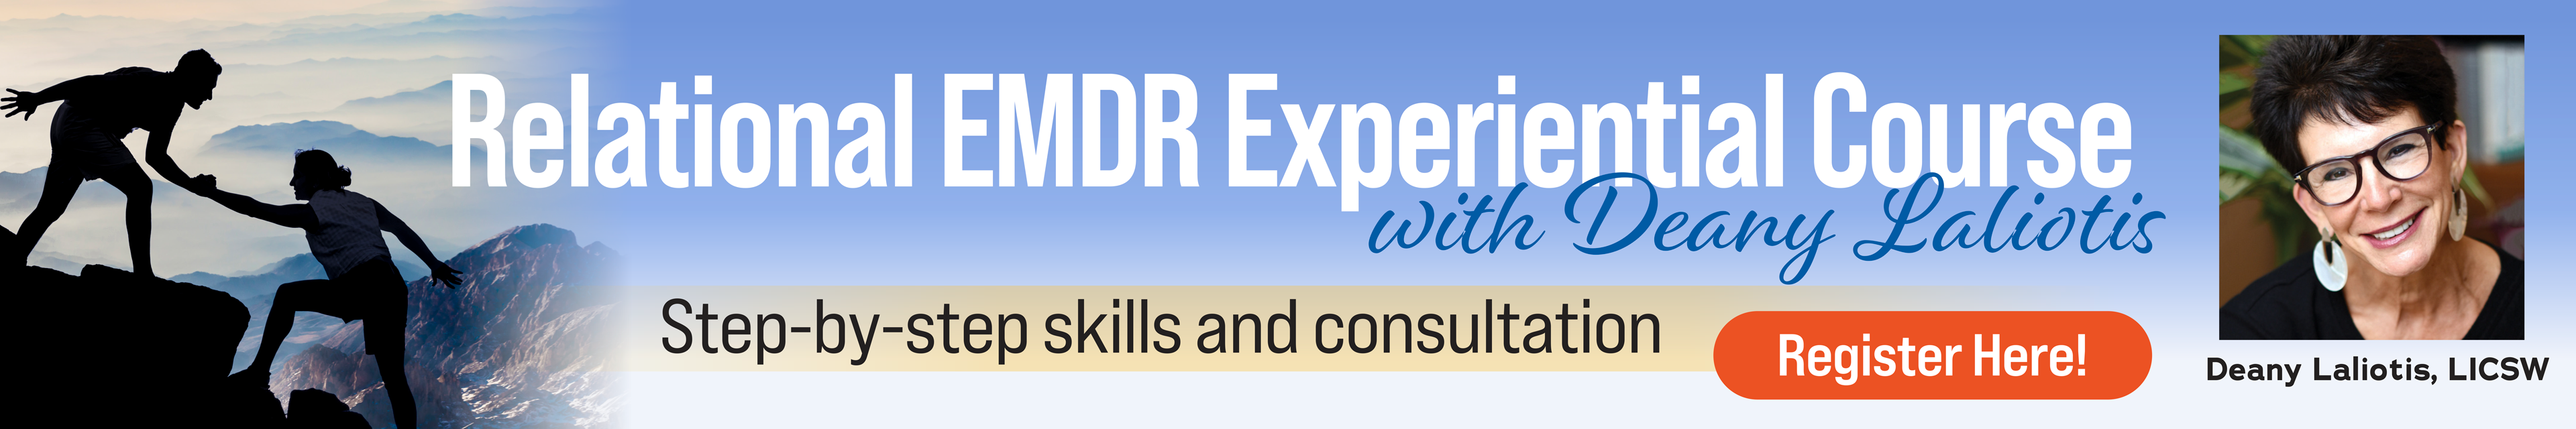 Relational EMDR Experiential Course with Deany Laliotis: Step-by-Step Skills and Consultation